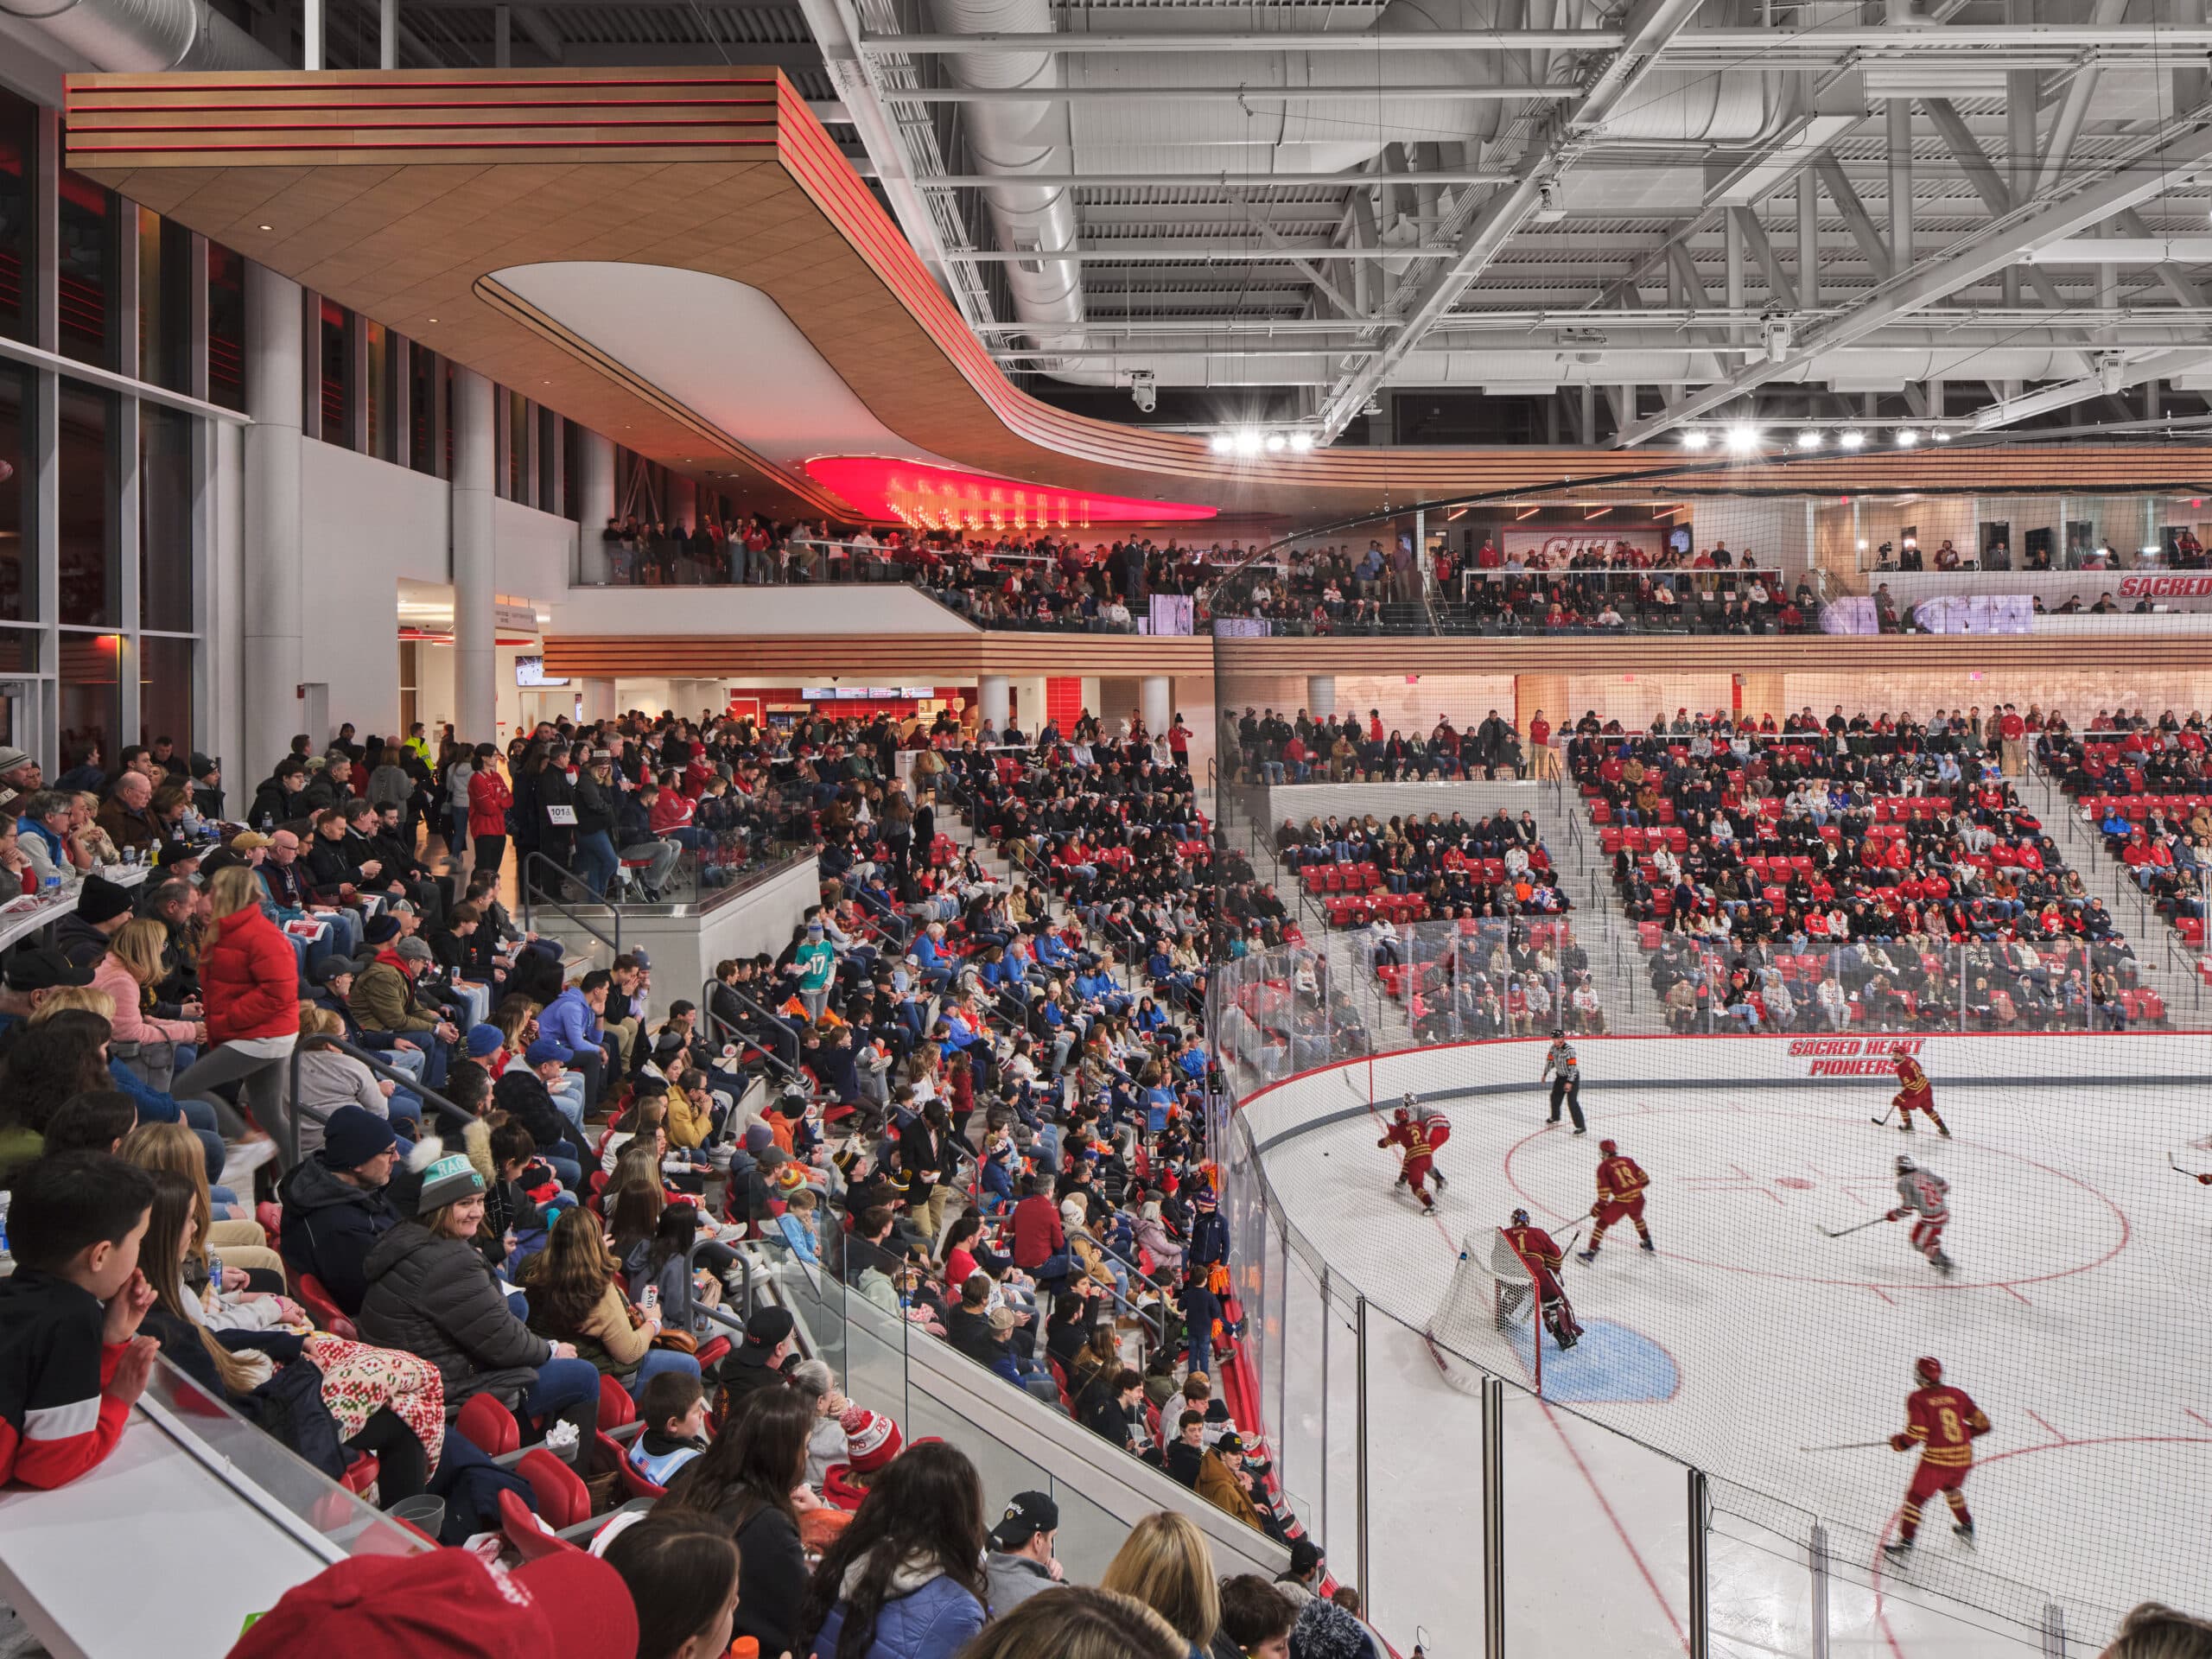 Sacred Heart hockey opens Martire Family Arena with sellout crowd